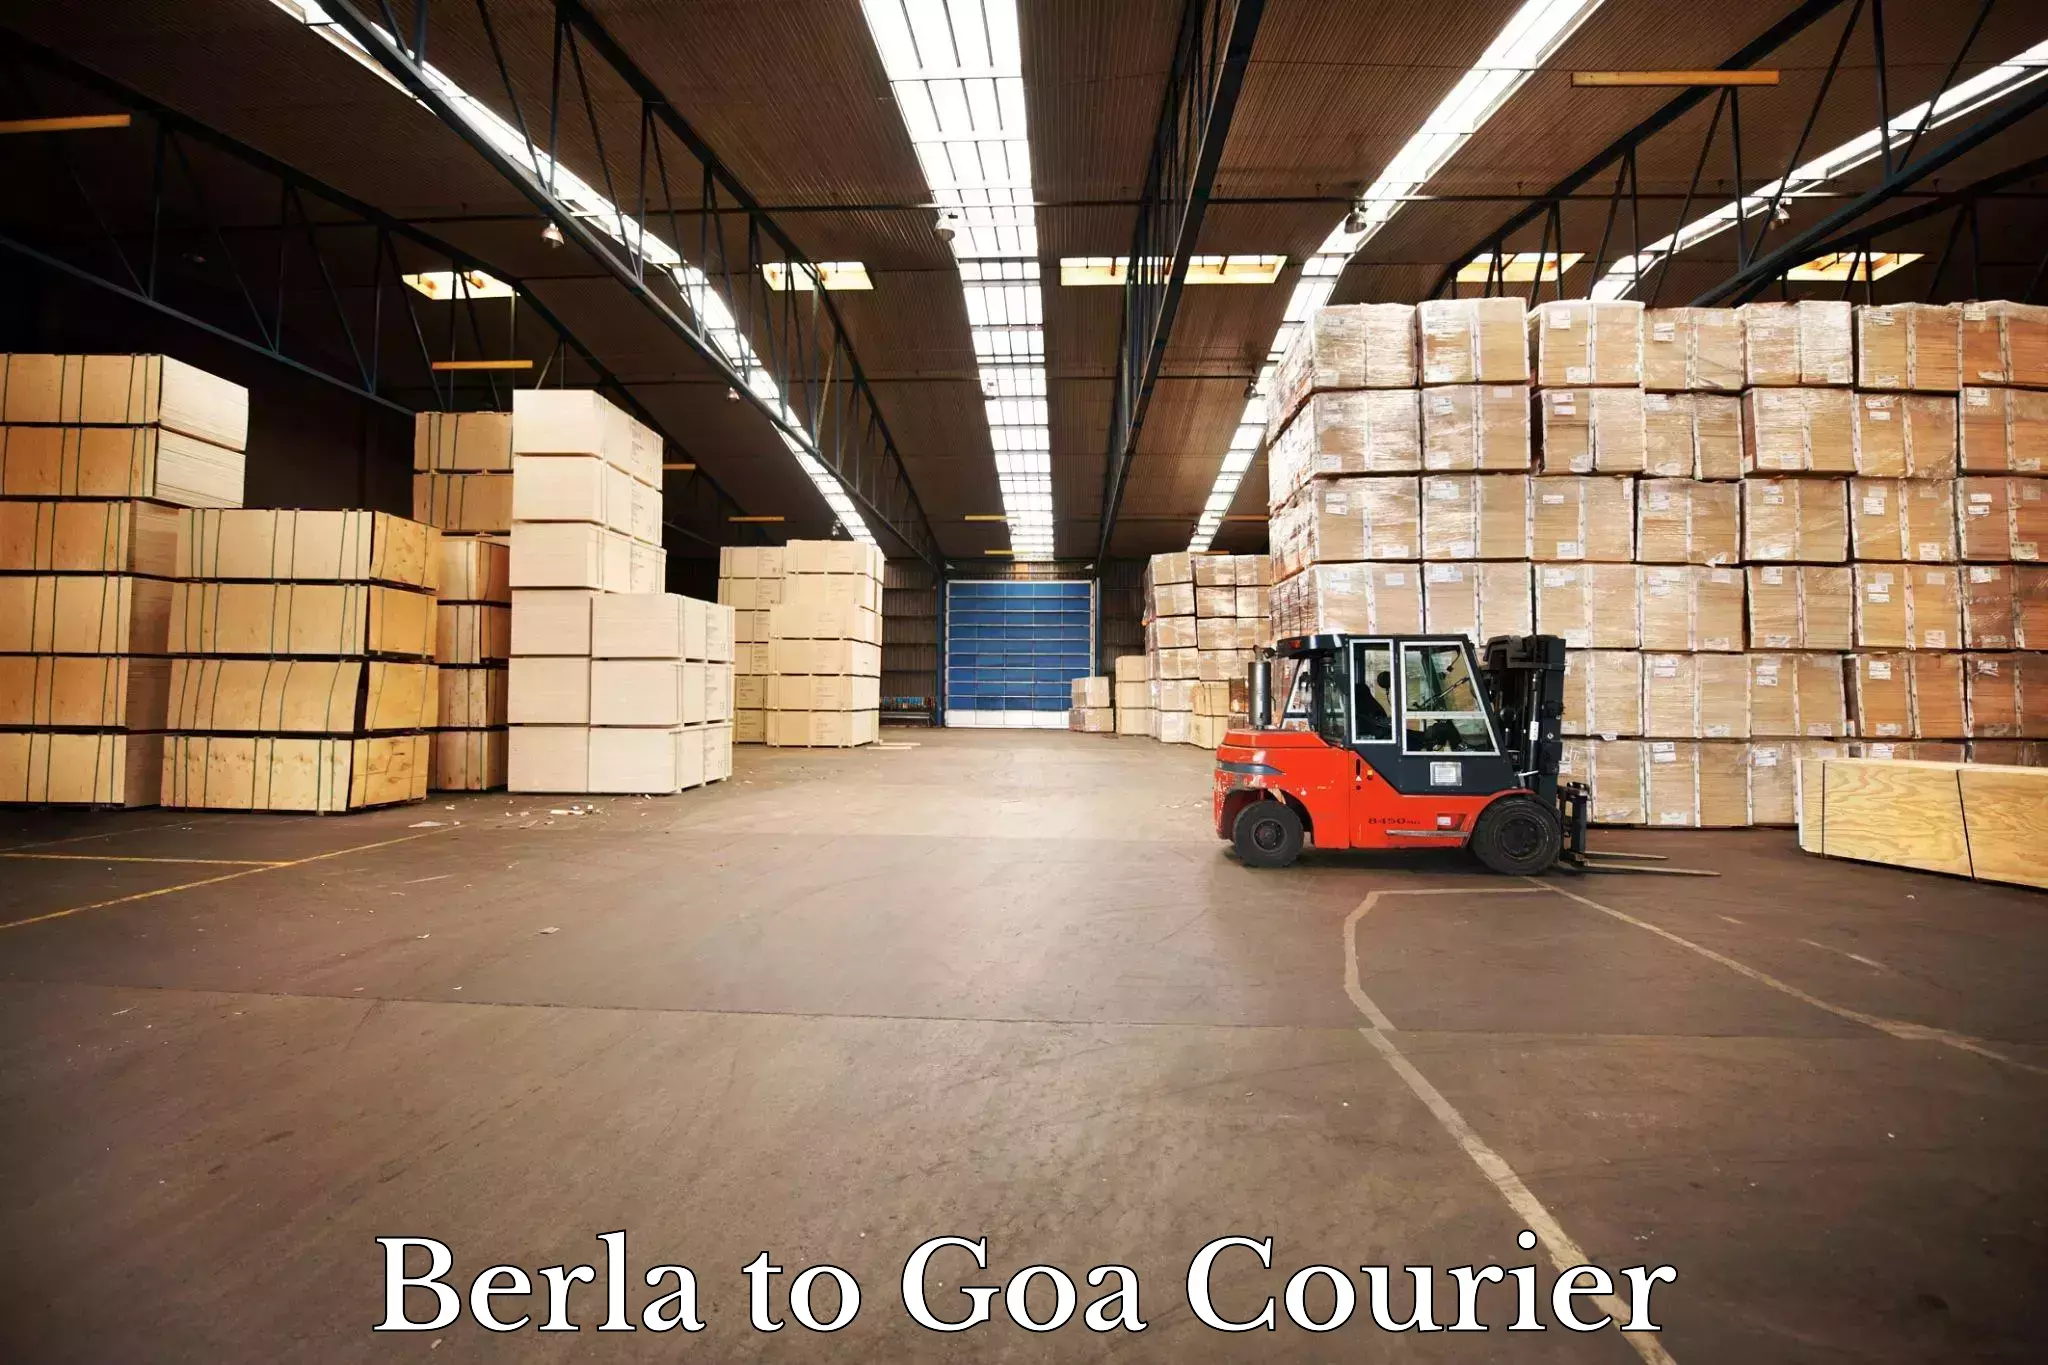 Express delivery capabilities Berla to Goa